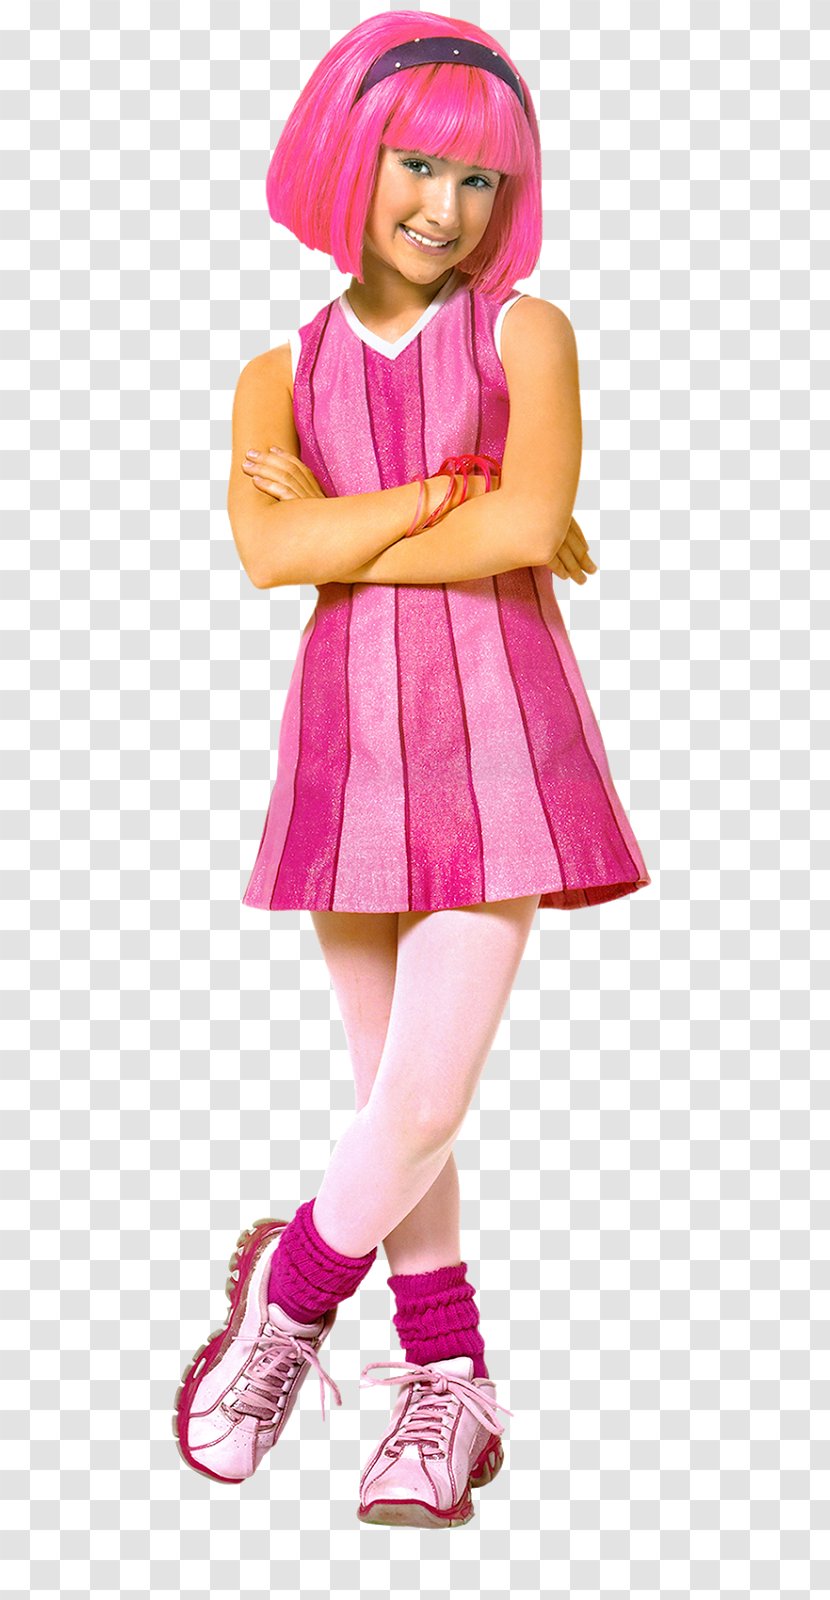 Chloe Lang Stephanie LazyTown Children's Television Series Show - Silhouette - Lazytown Transparent PNG